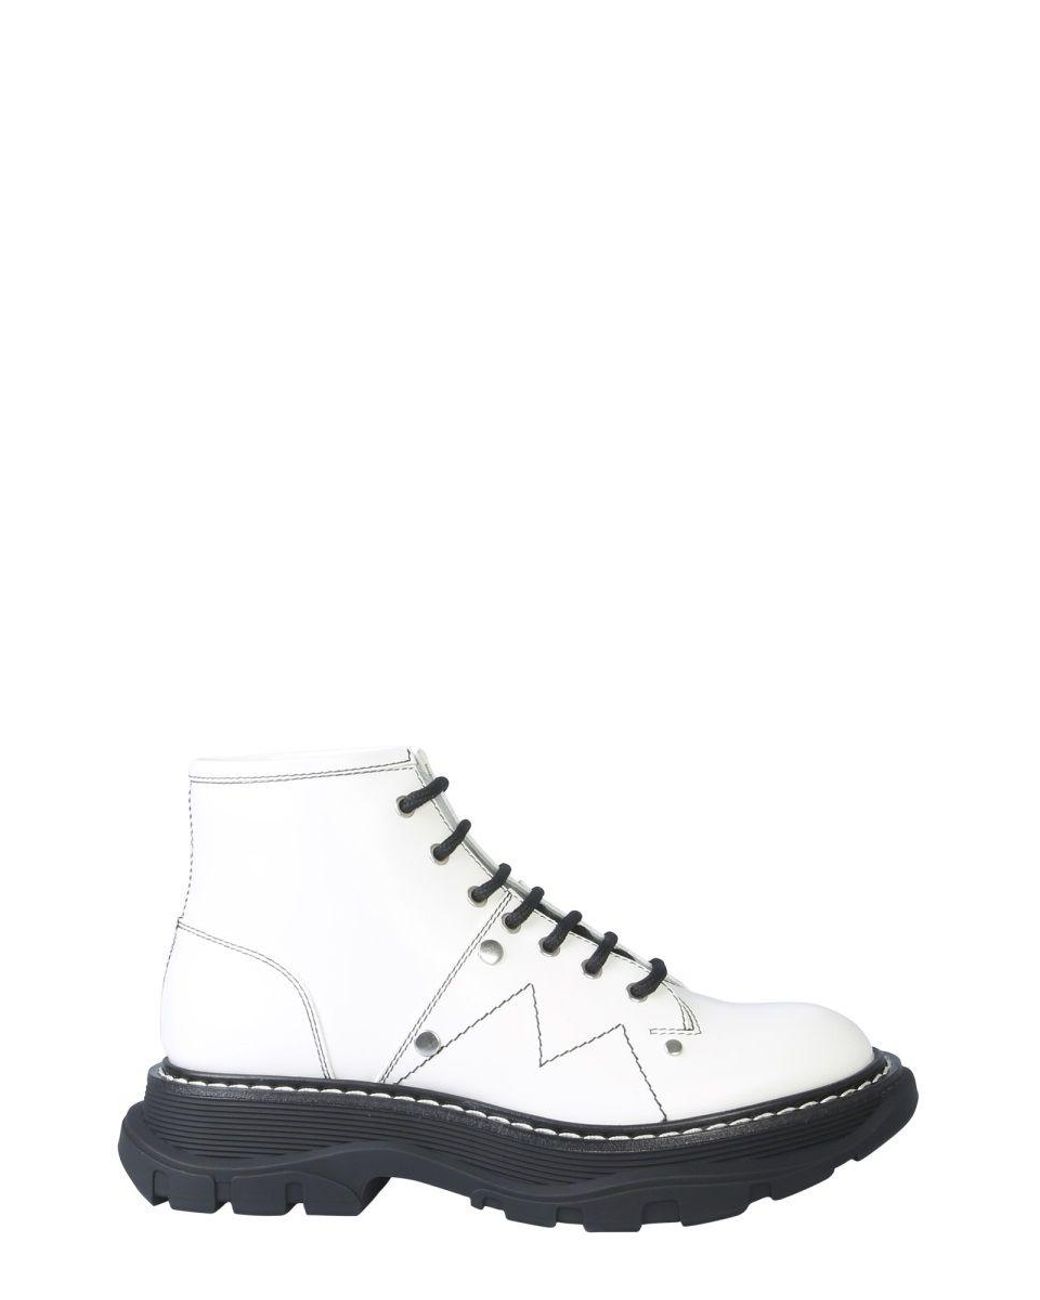 Alexander McQueen Leather Trad Ankle Boots in White - Save 33% - Lyst